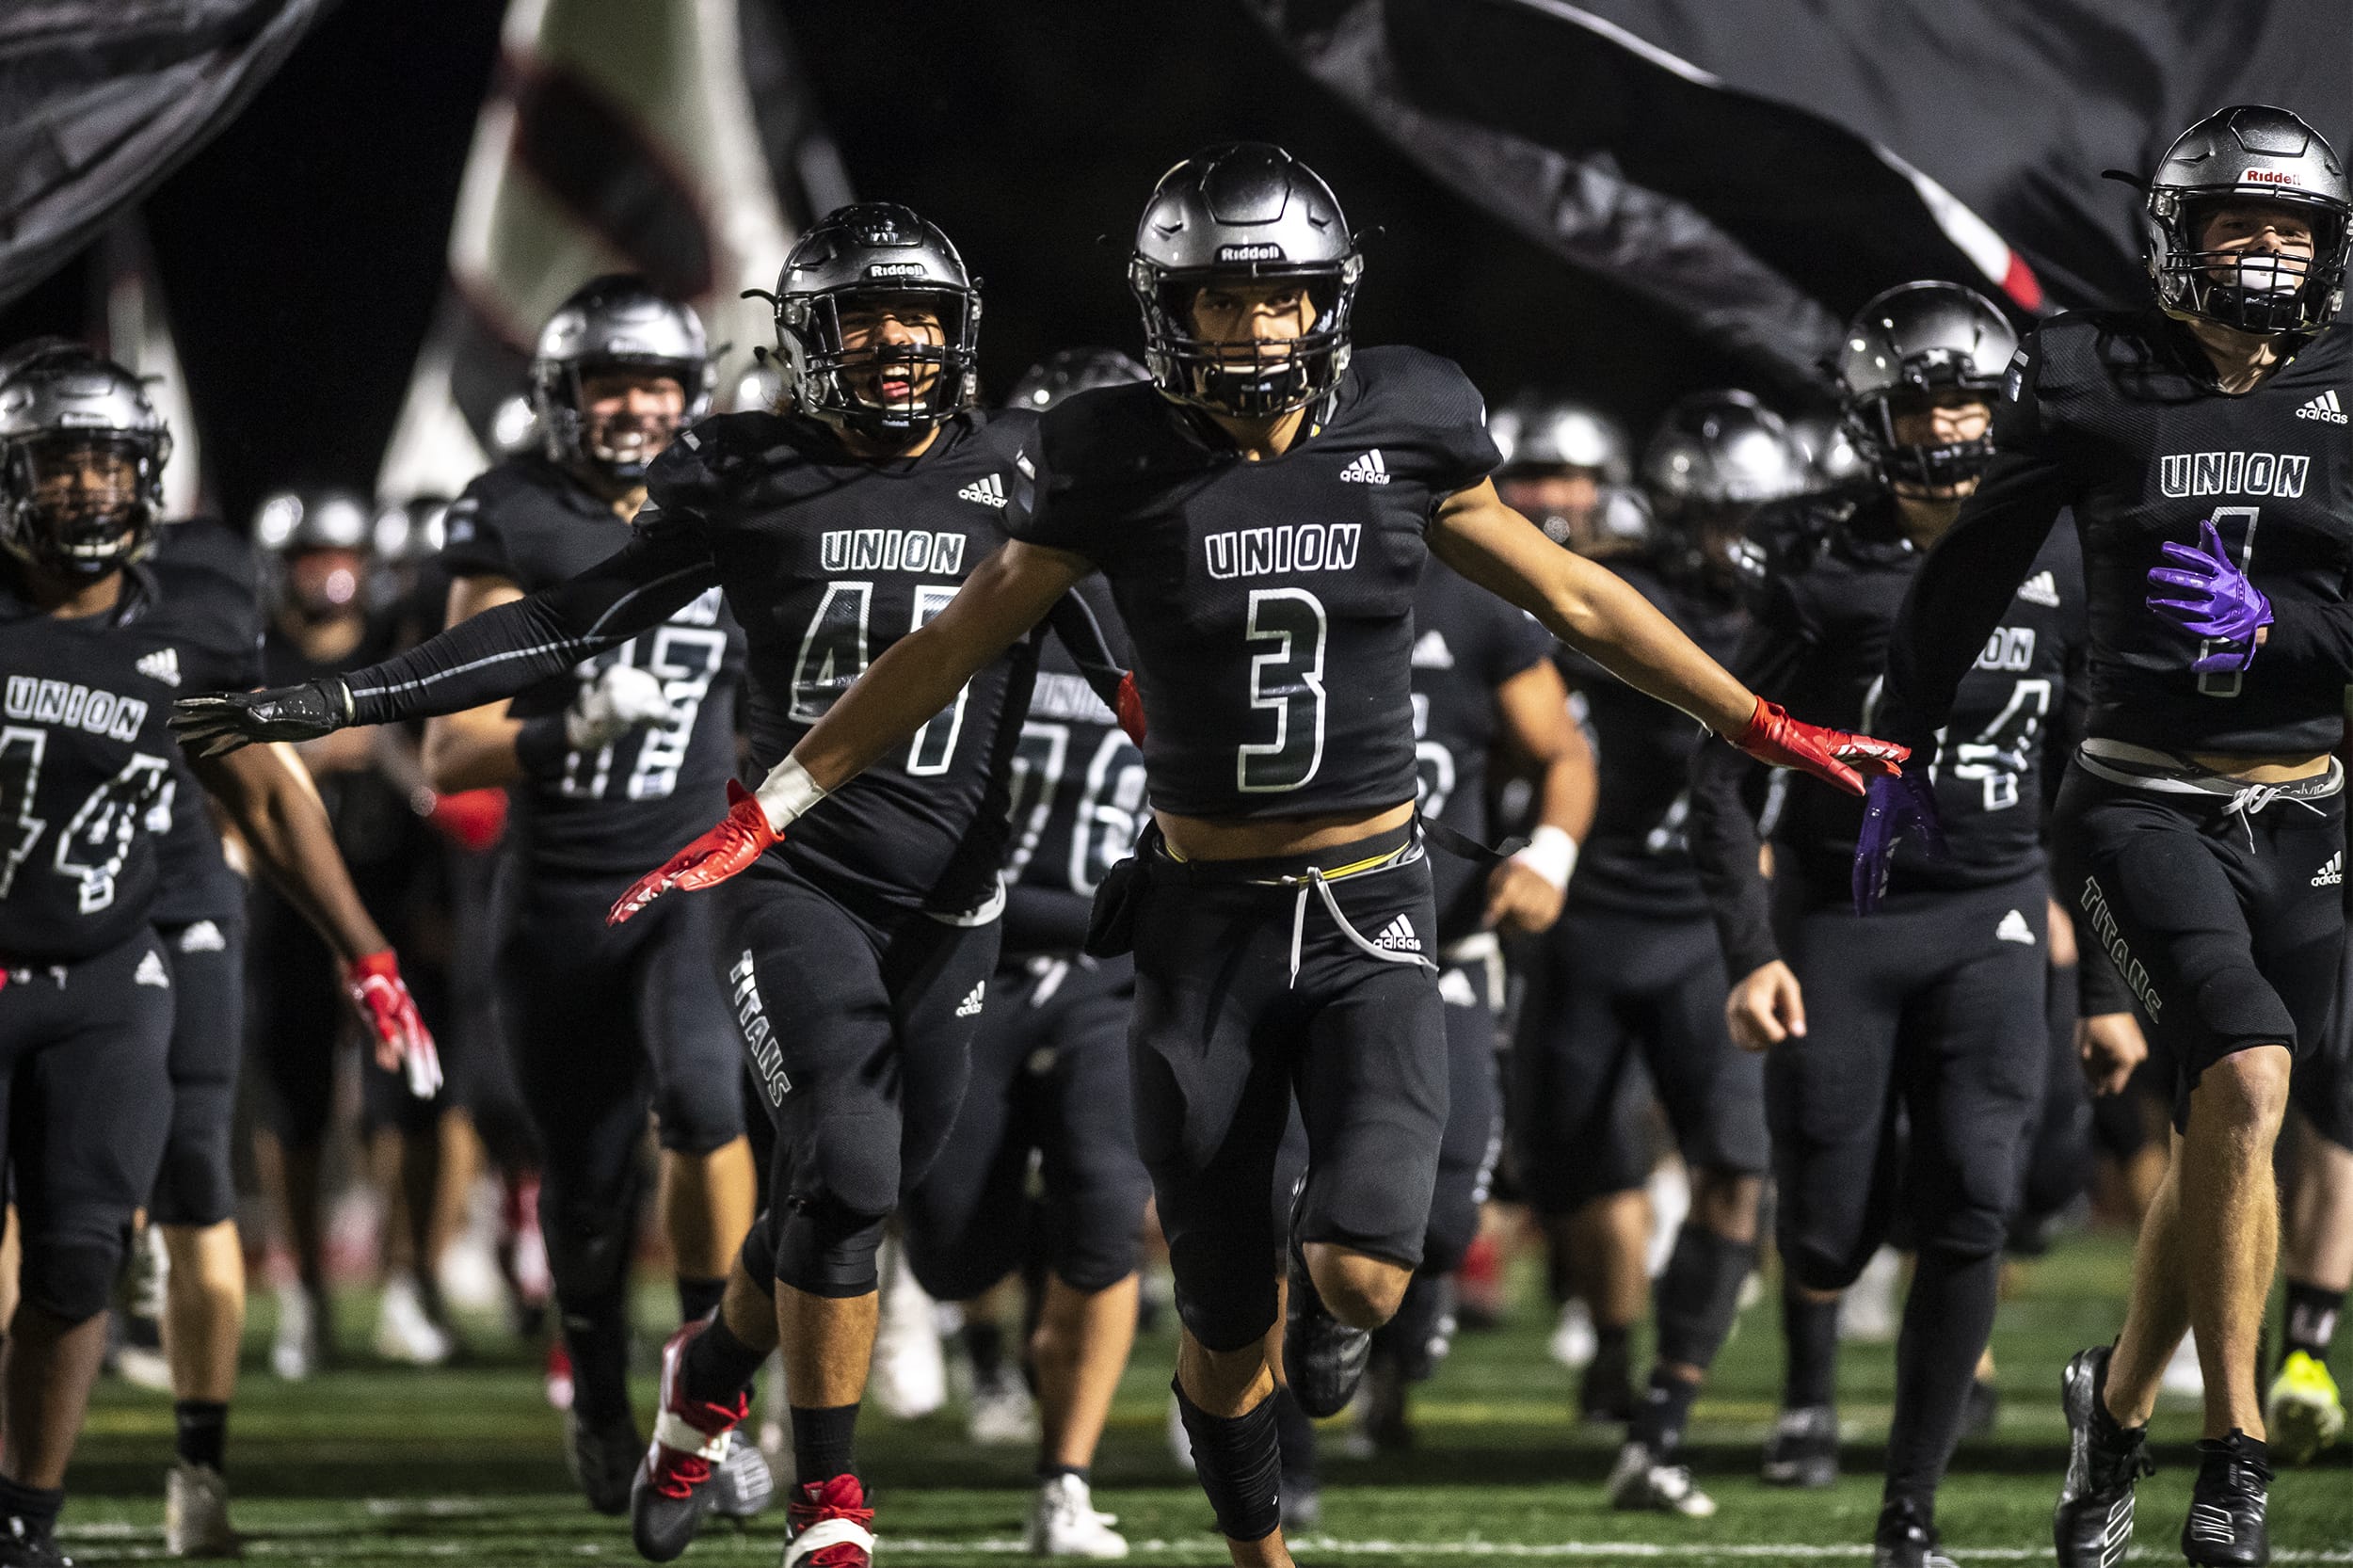 The Union Titans run onto the field after halftime during a game against Skyview at McKenzie Stadium on Friday night, Oct. 11, 2019.